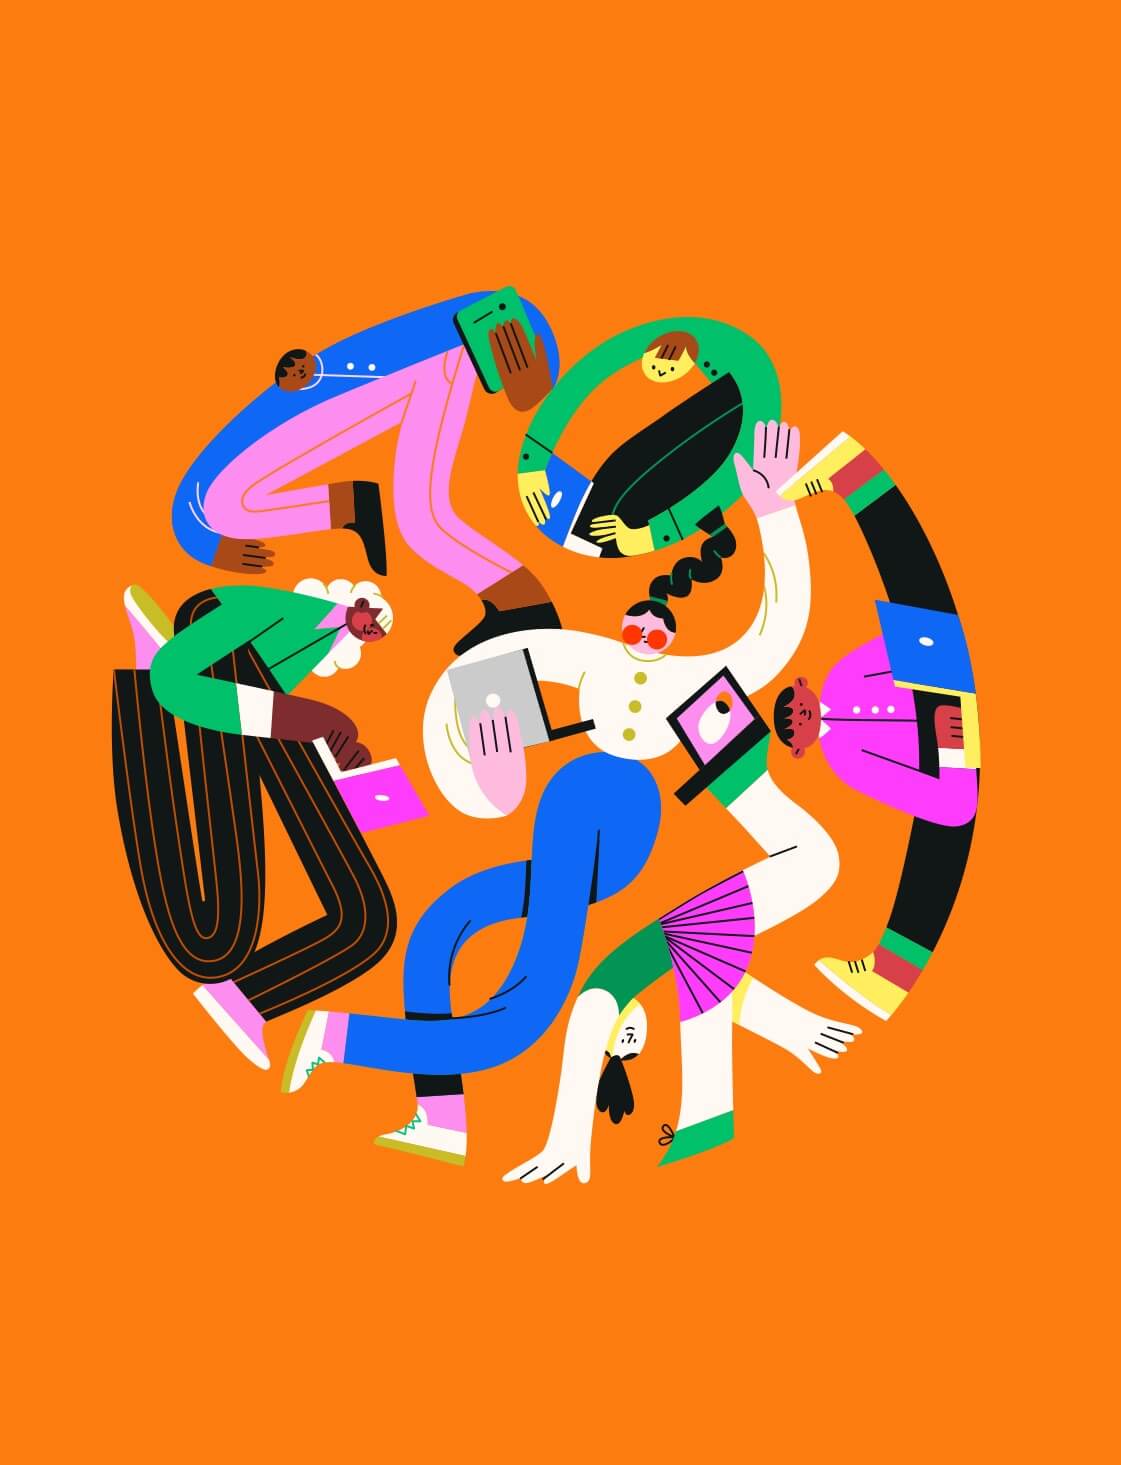 Group of flat-style characters illustration by Tania Yakunova for Linearity Curve